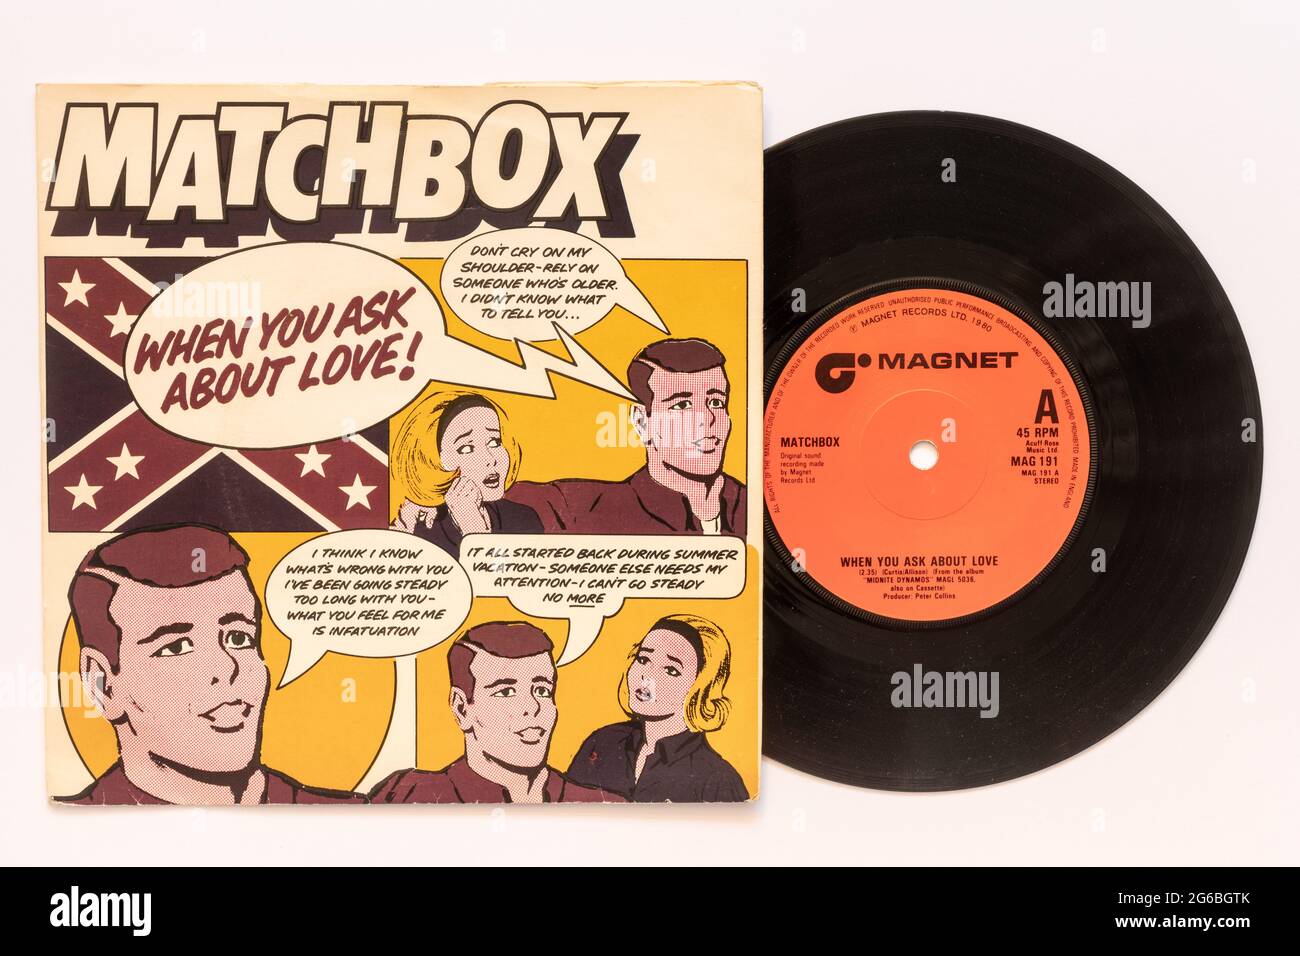 When you ask about love by Matchbox, a stock photo of the 7' single vinyl 45 rpm record in picture sleeve Stock Photo